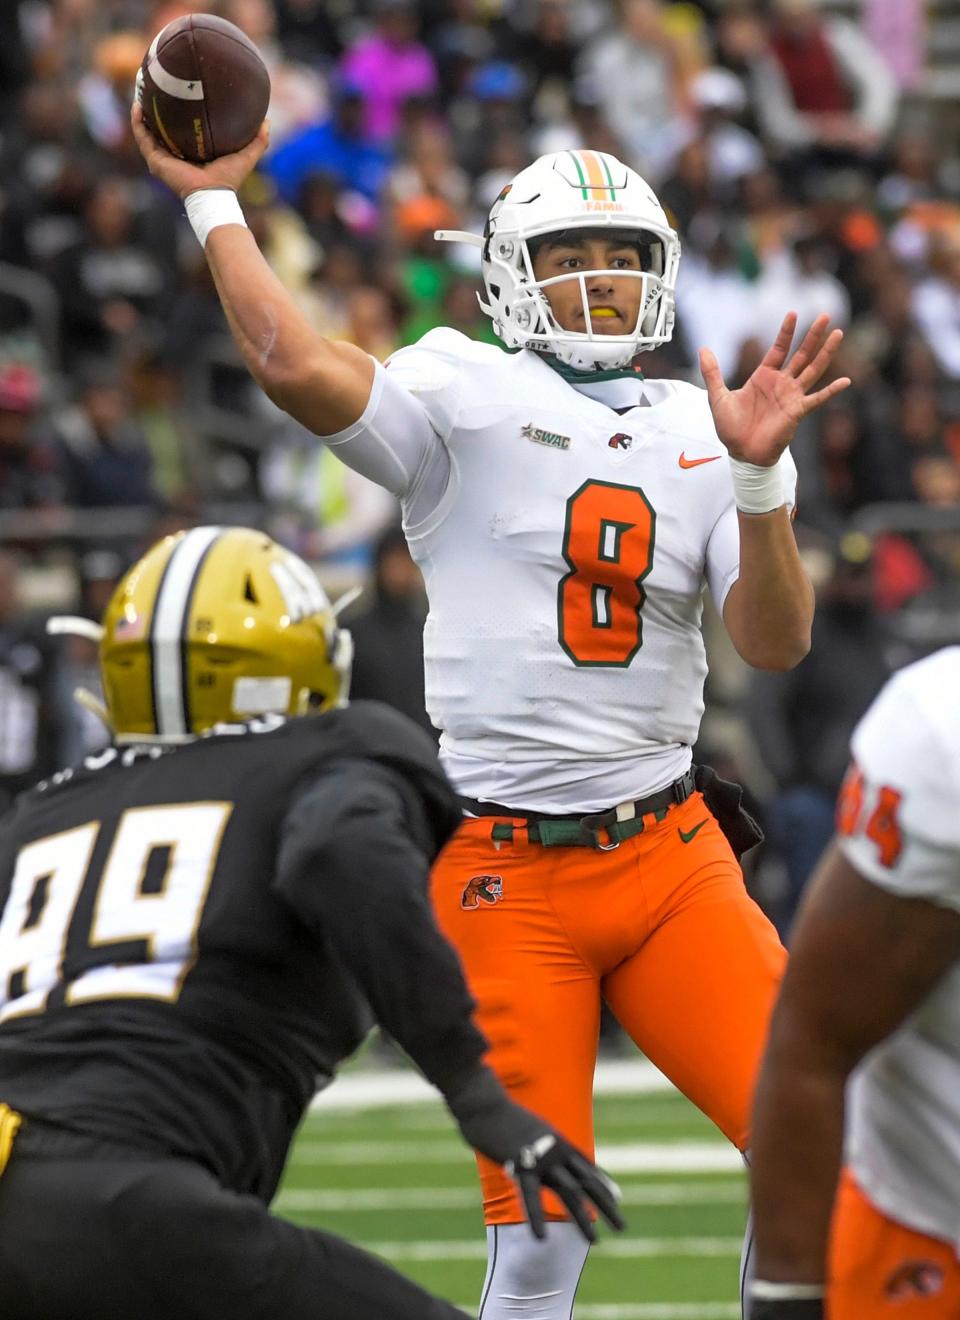 Florida A&M quarterback Jeremy Moussa (8) throws a touchdown pass against Alabama State during their game at Hornet Stadium in Montgomery, Ala. on Saturday November 12, 2022.

Asu04